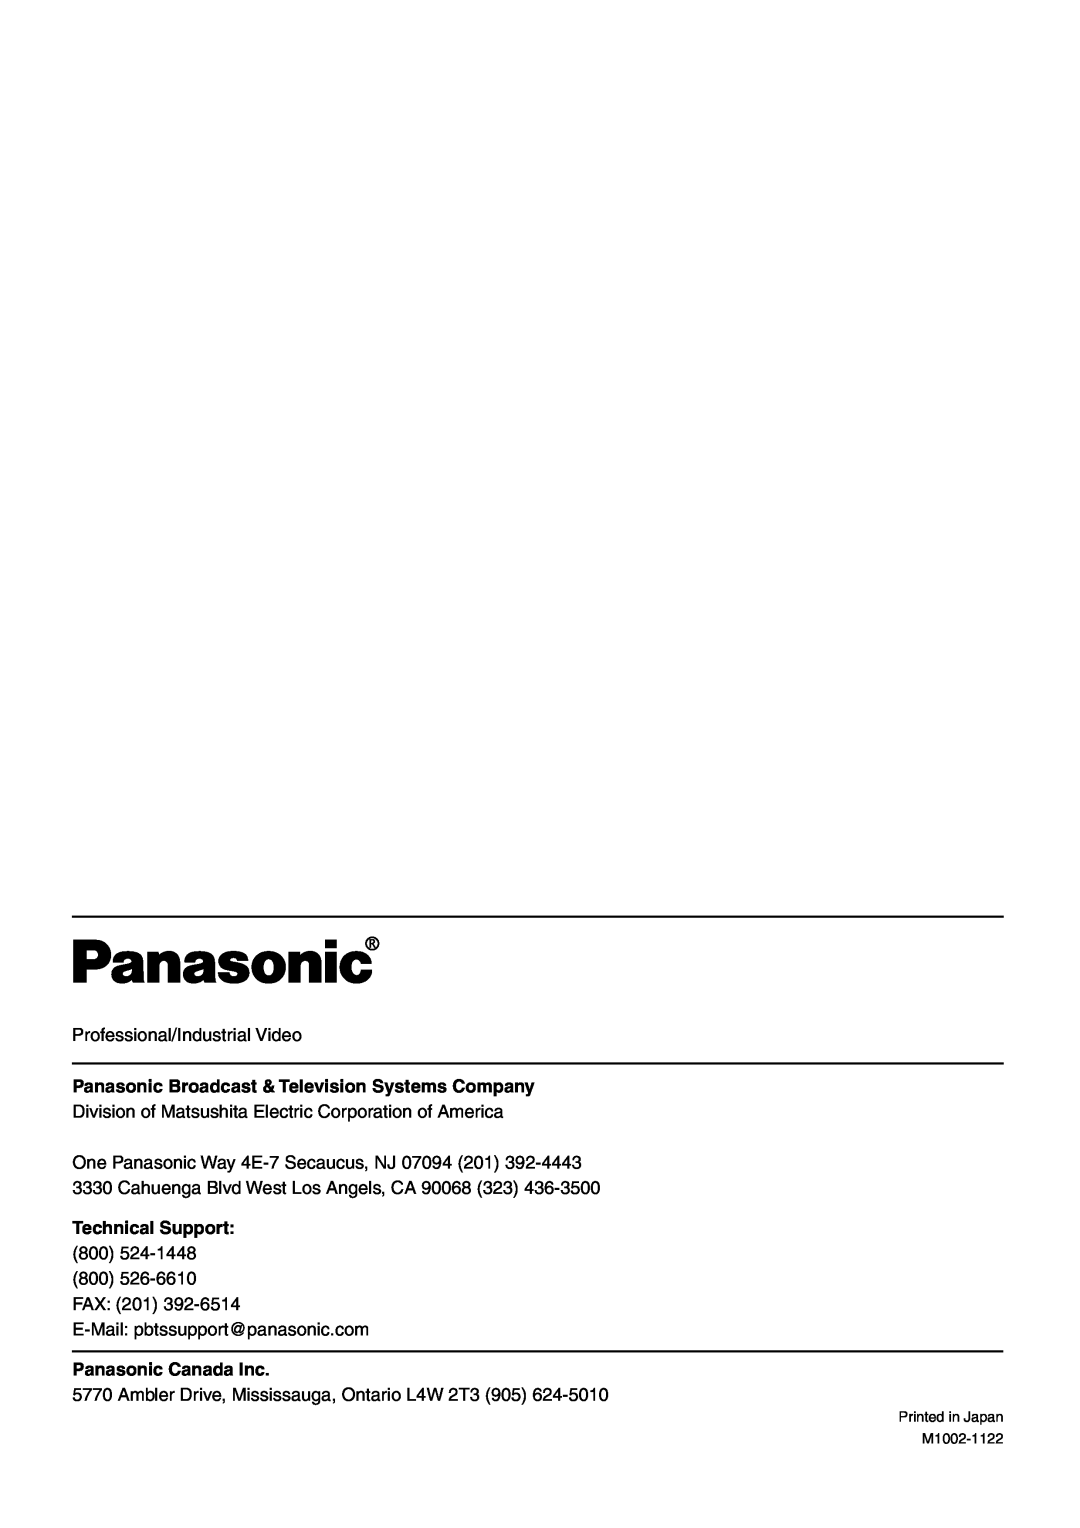 Panasonic PT-L6510U Professional/Industrial Video, Panasonic Broadcast & Television Systems Company, Technical Support 